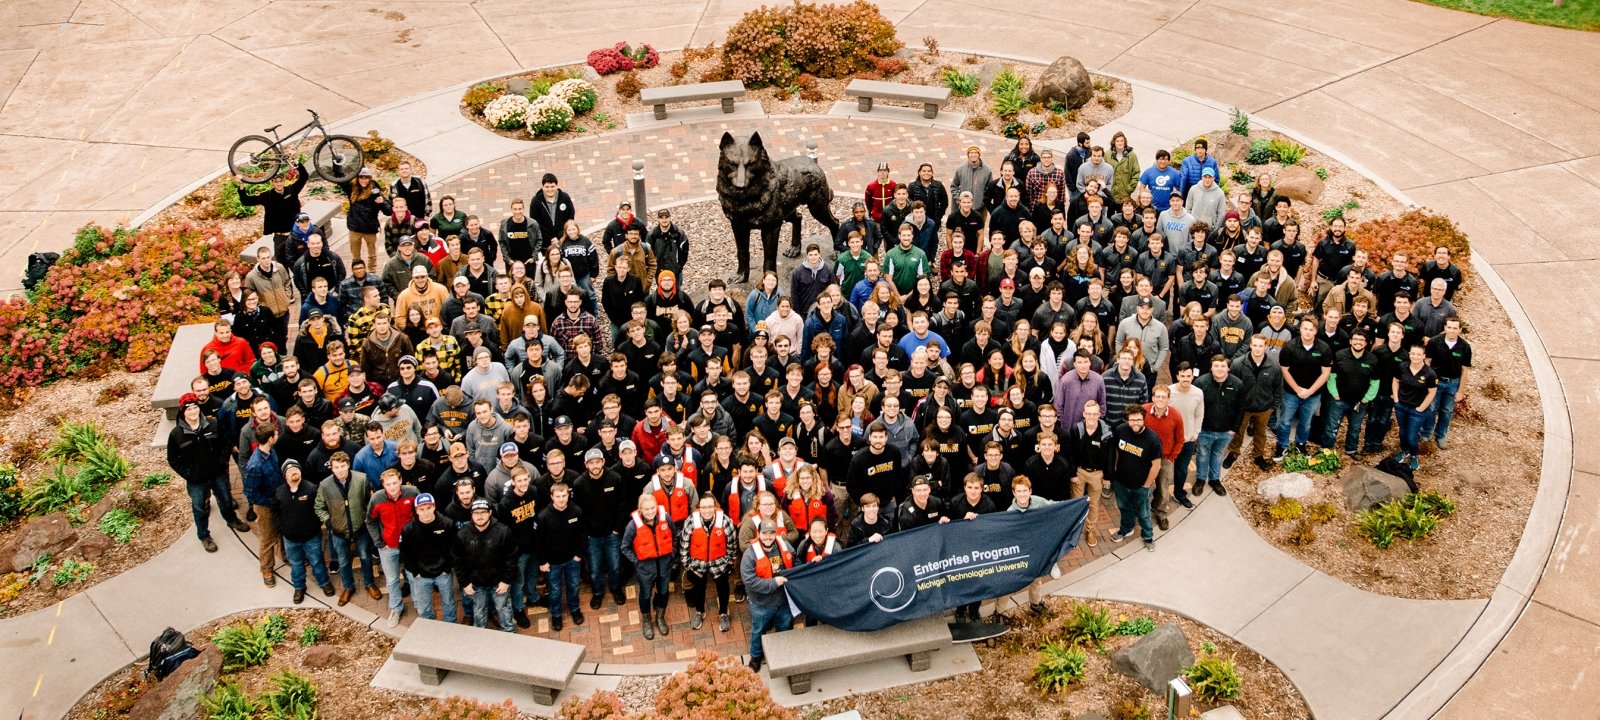 Over 200 current Enterprise students pose near the husky statue